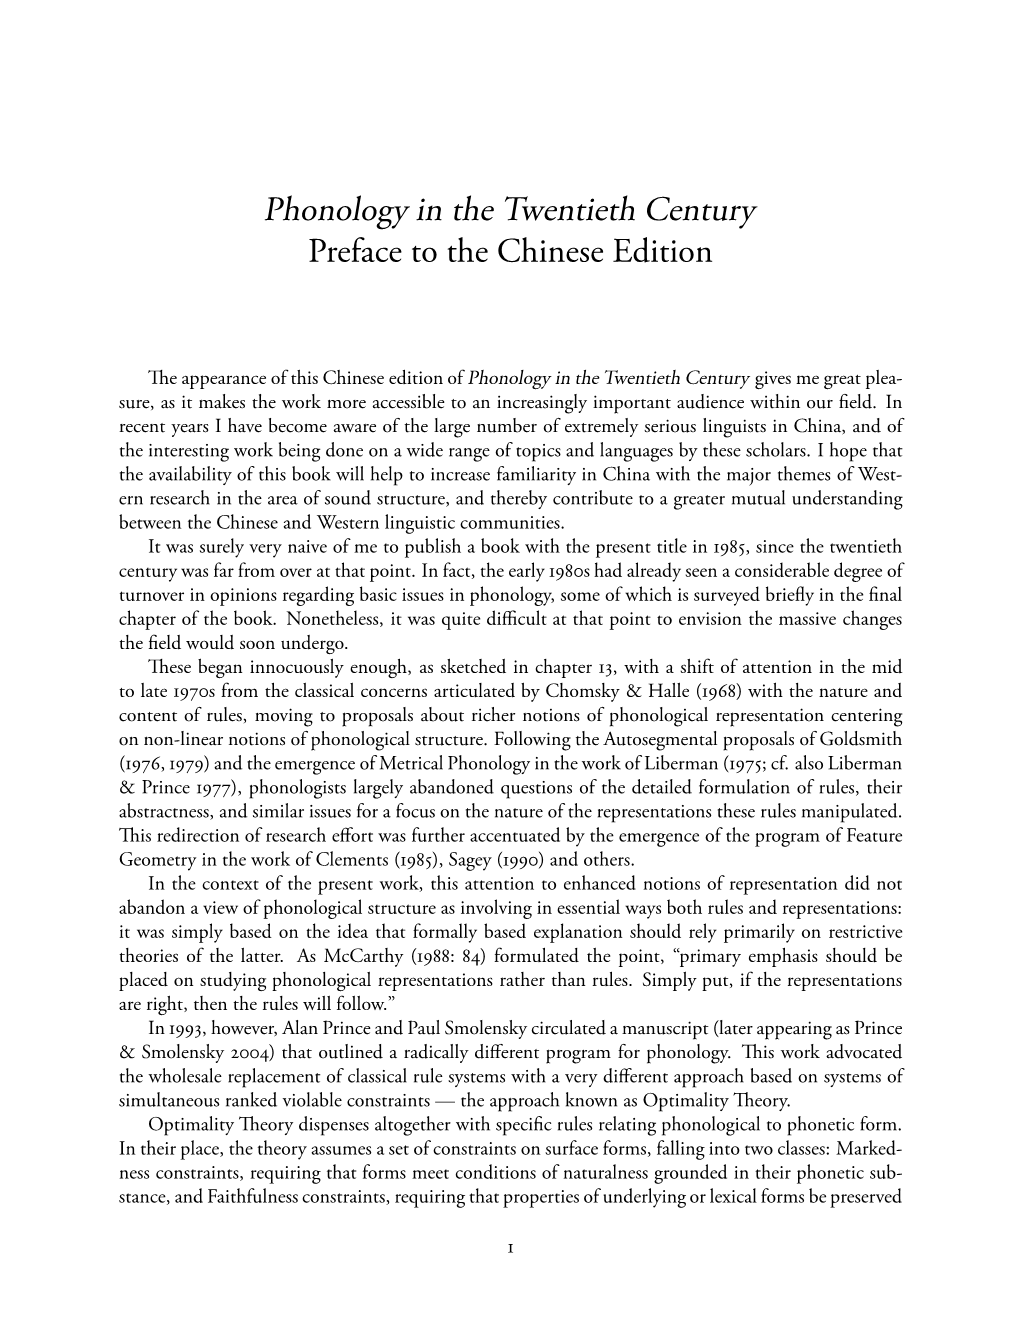 Phonology in the Twentieth Century Preface to the Chinese Edition